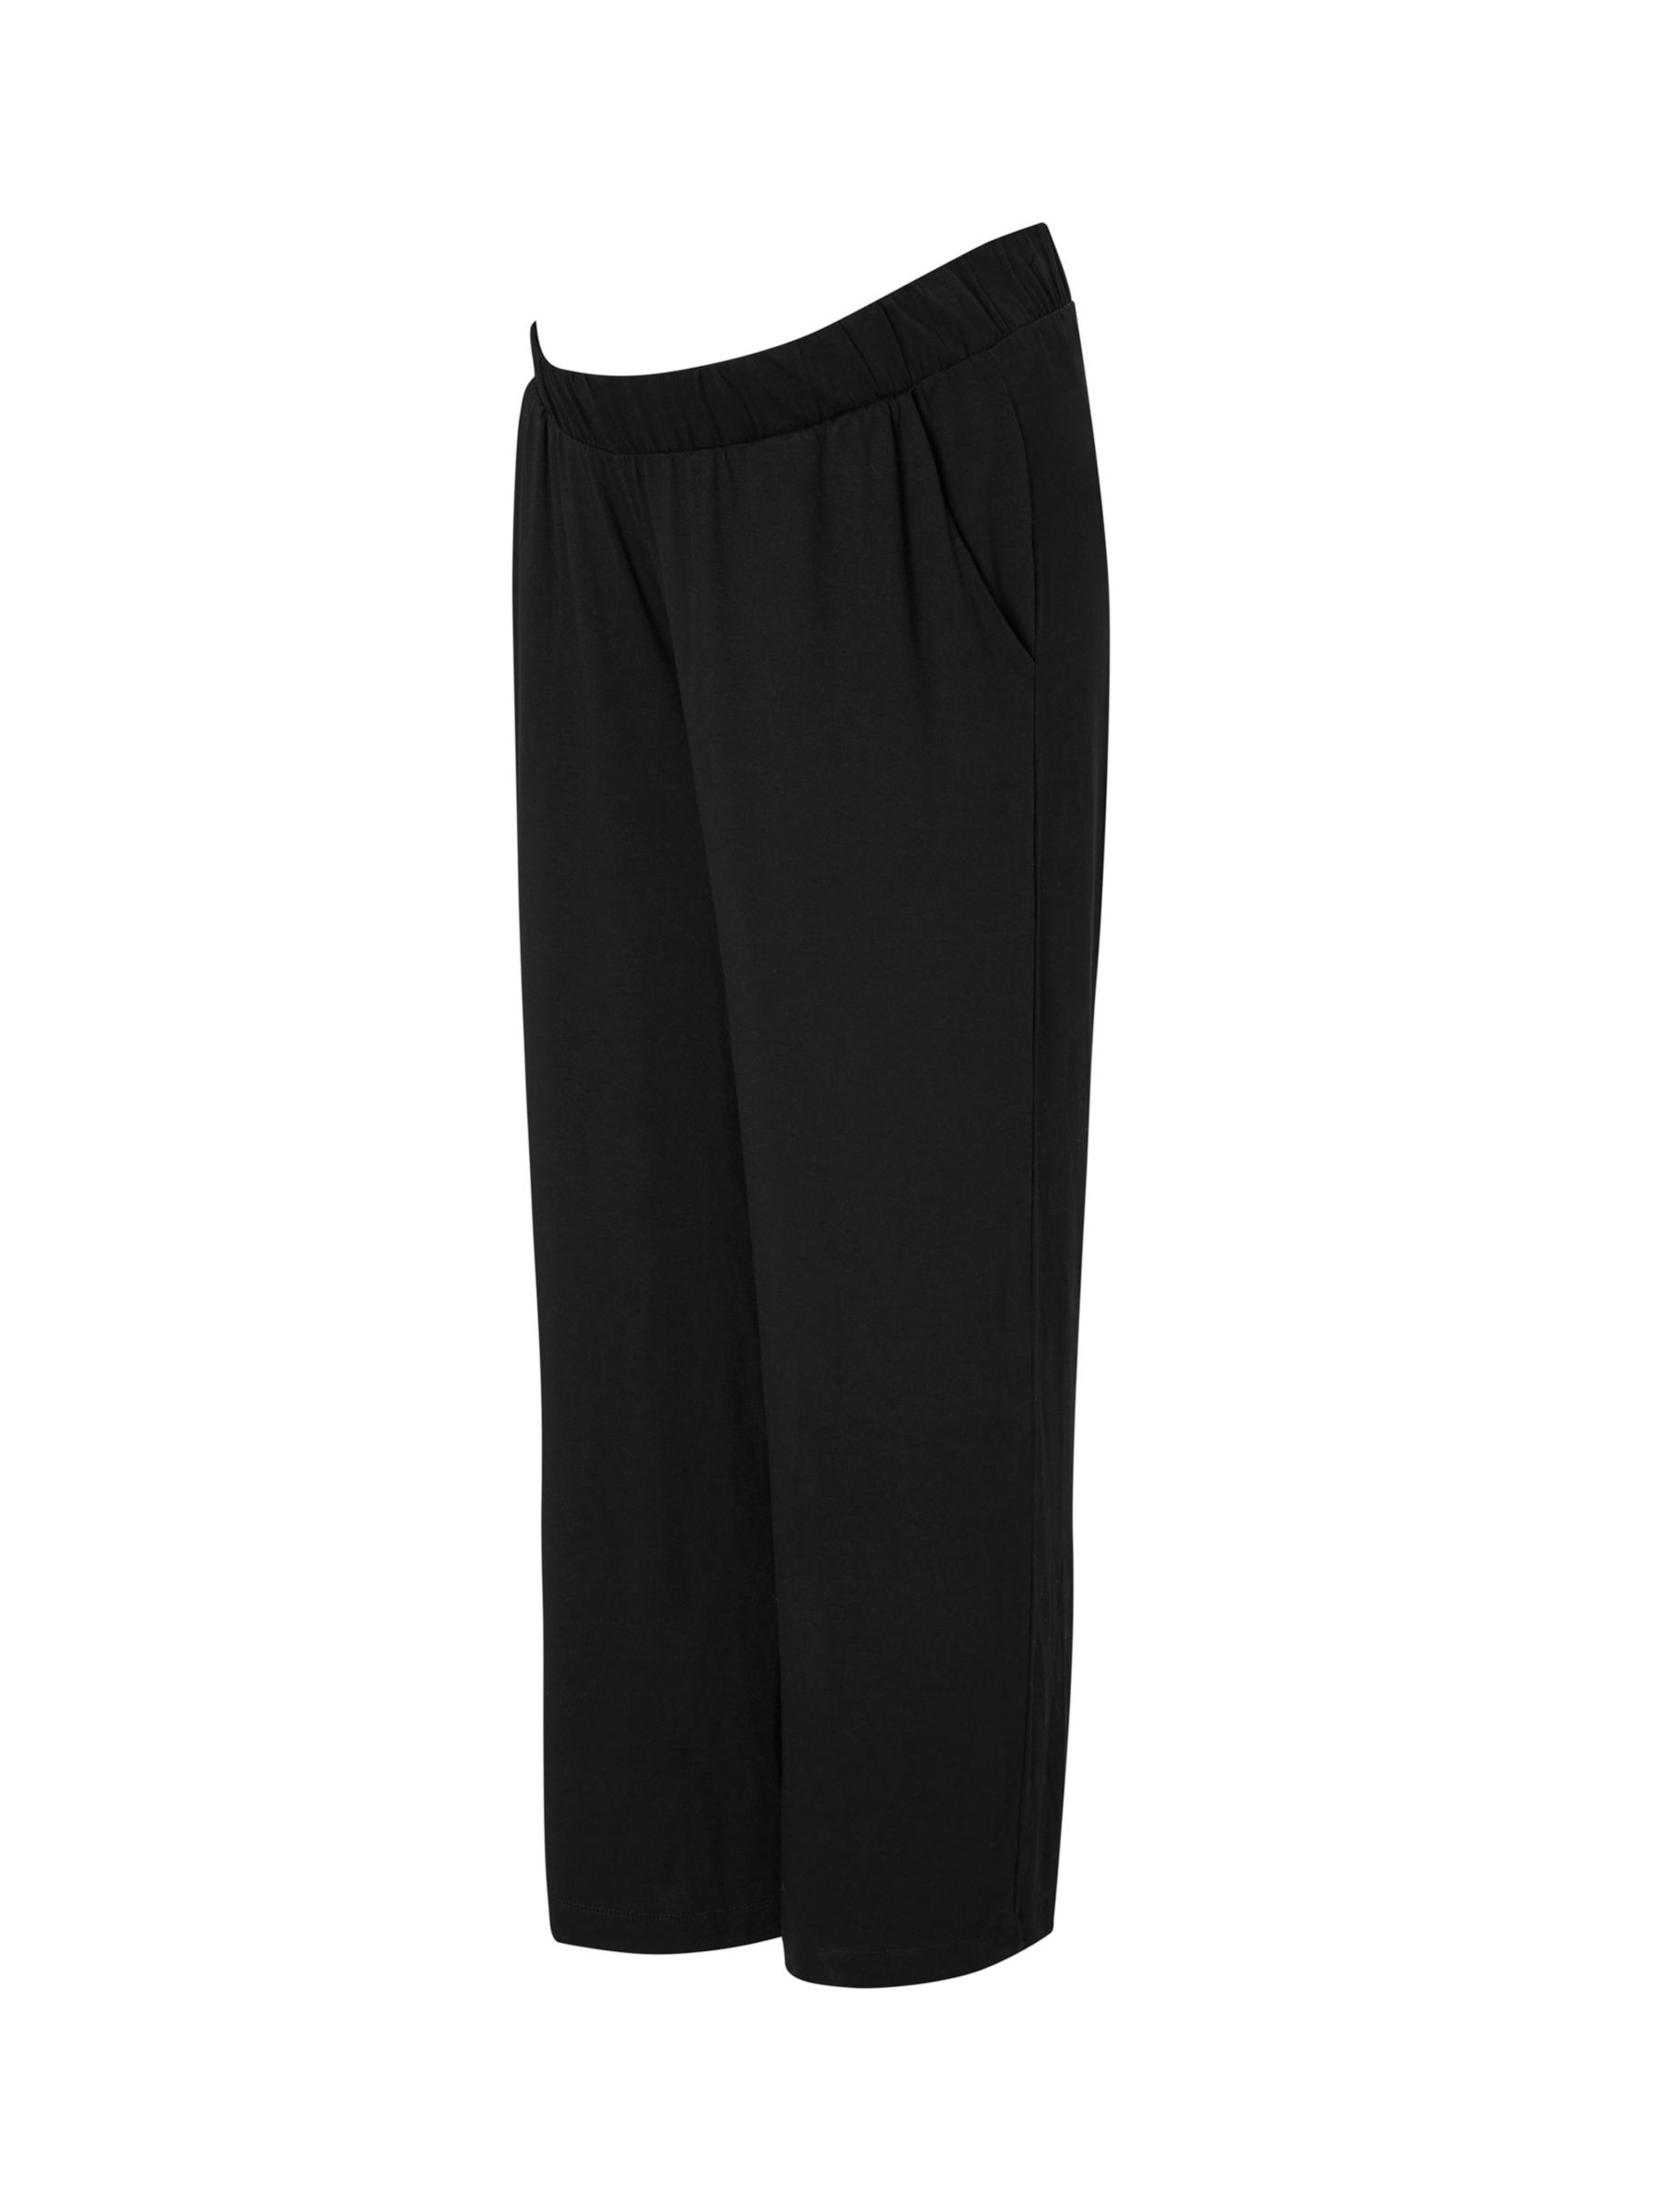 Isabella Oliver Bethany Maternity Trousers, Caviar Black, 4